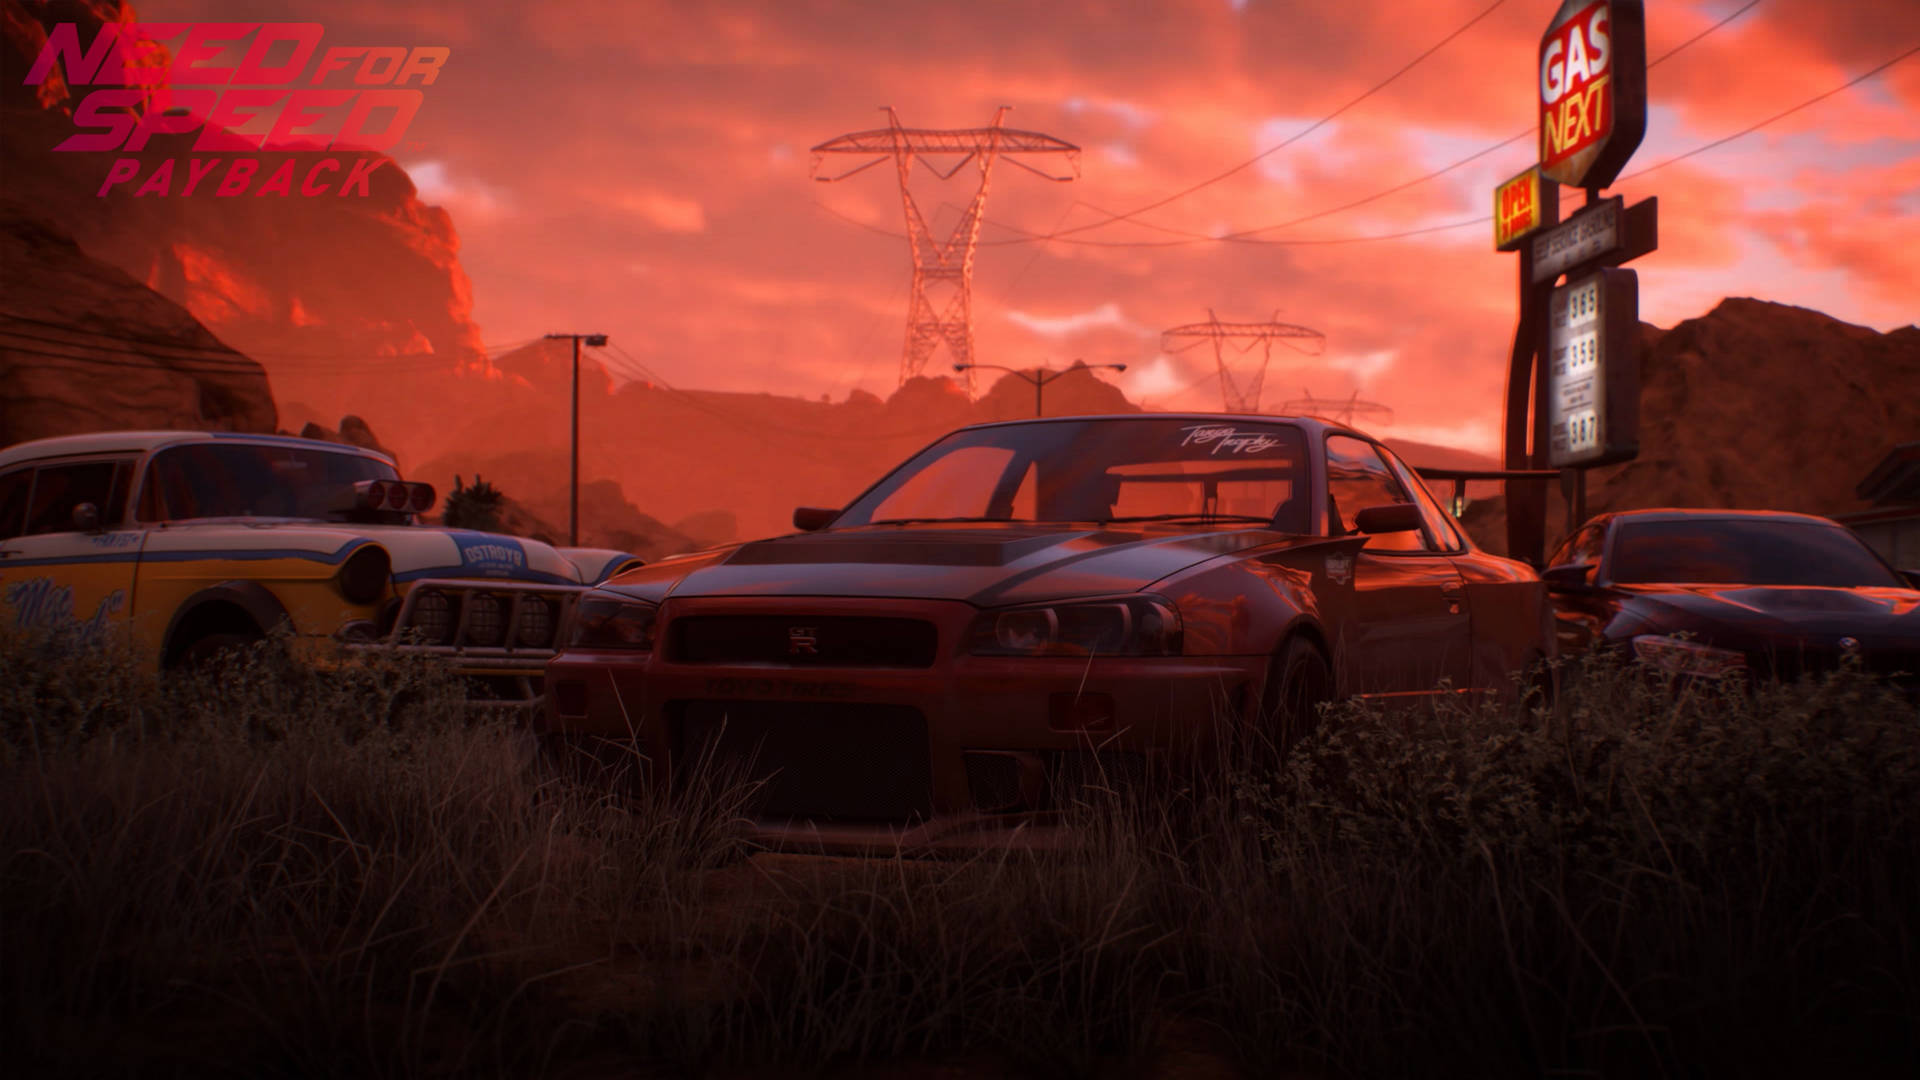 Need For Speed Payback Gas Station Sunset